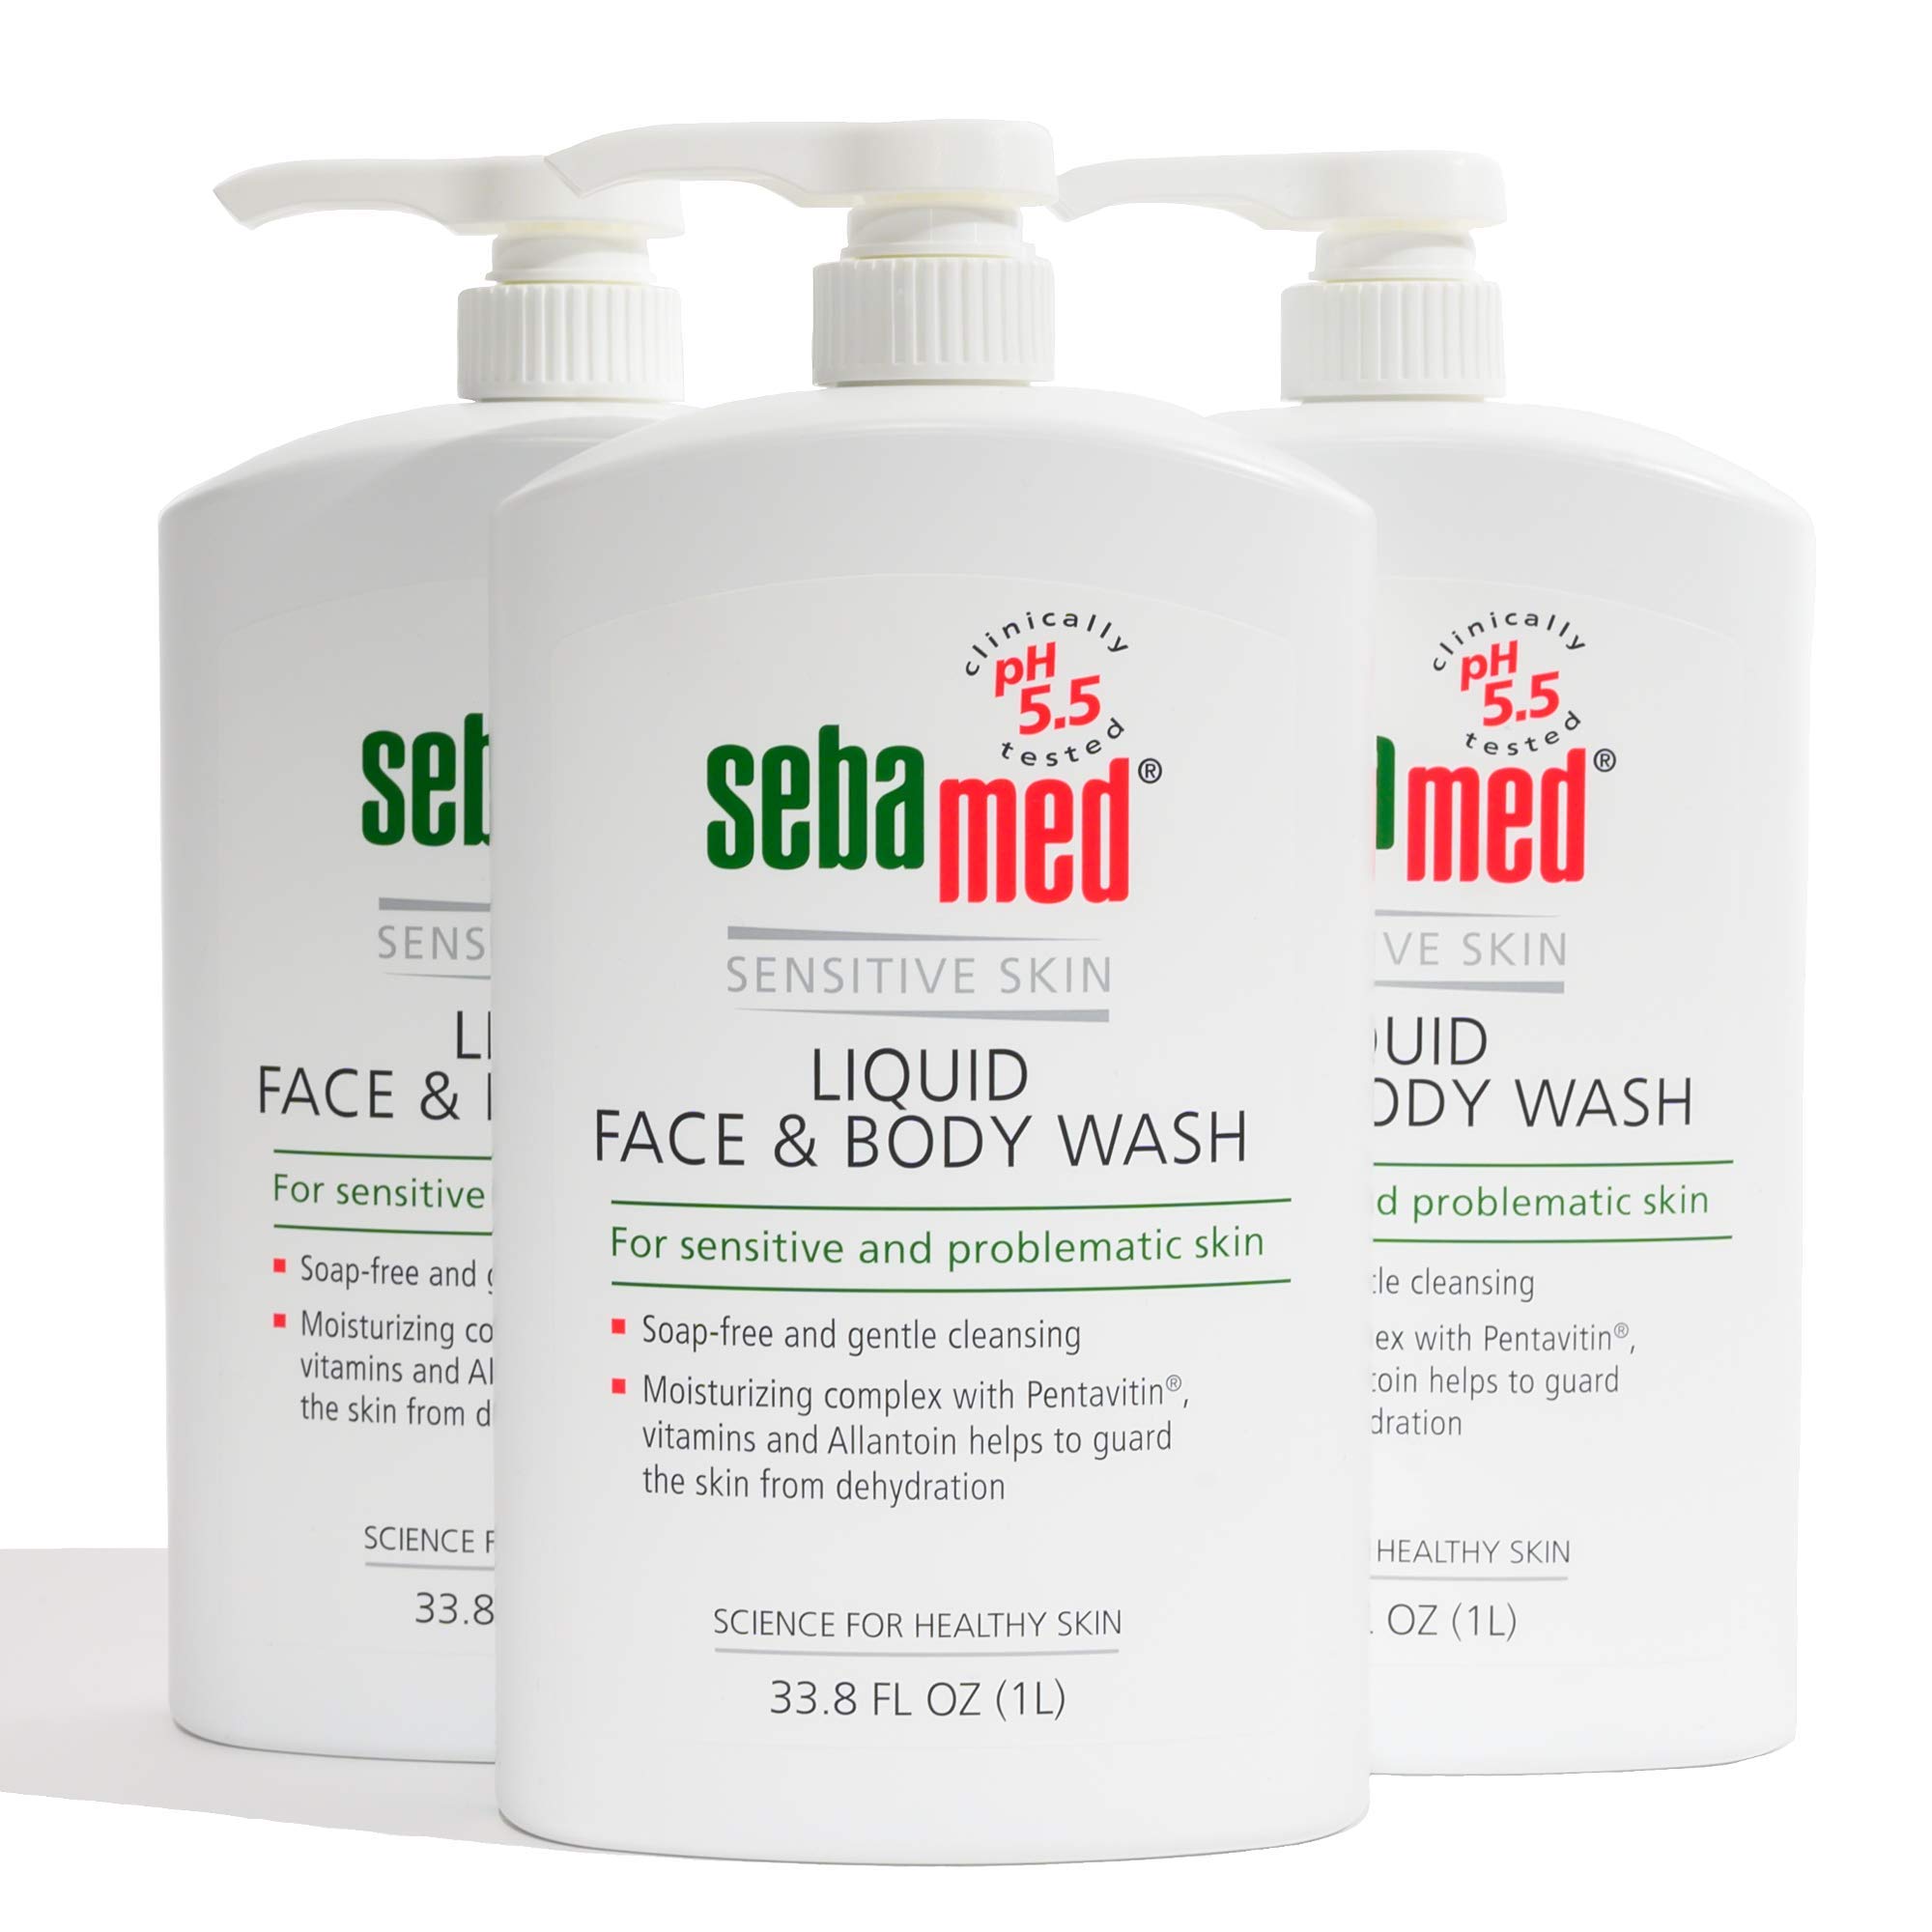 SEBAMED Paraben-Free Face and Body Wash With Pump for Sensitive and Delicate Skin pH 5.5 Ultra Mild Dermatologist Recommended Cleanser 33.8 Fluid Ounces (1 Liter) Pack of 3